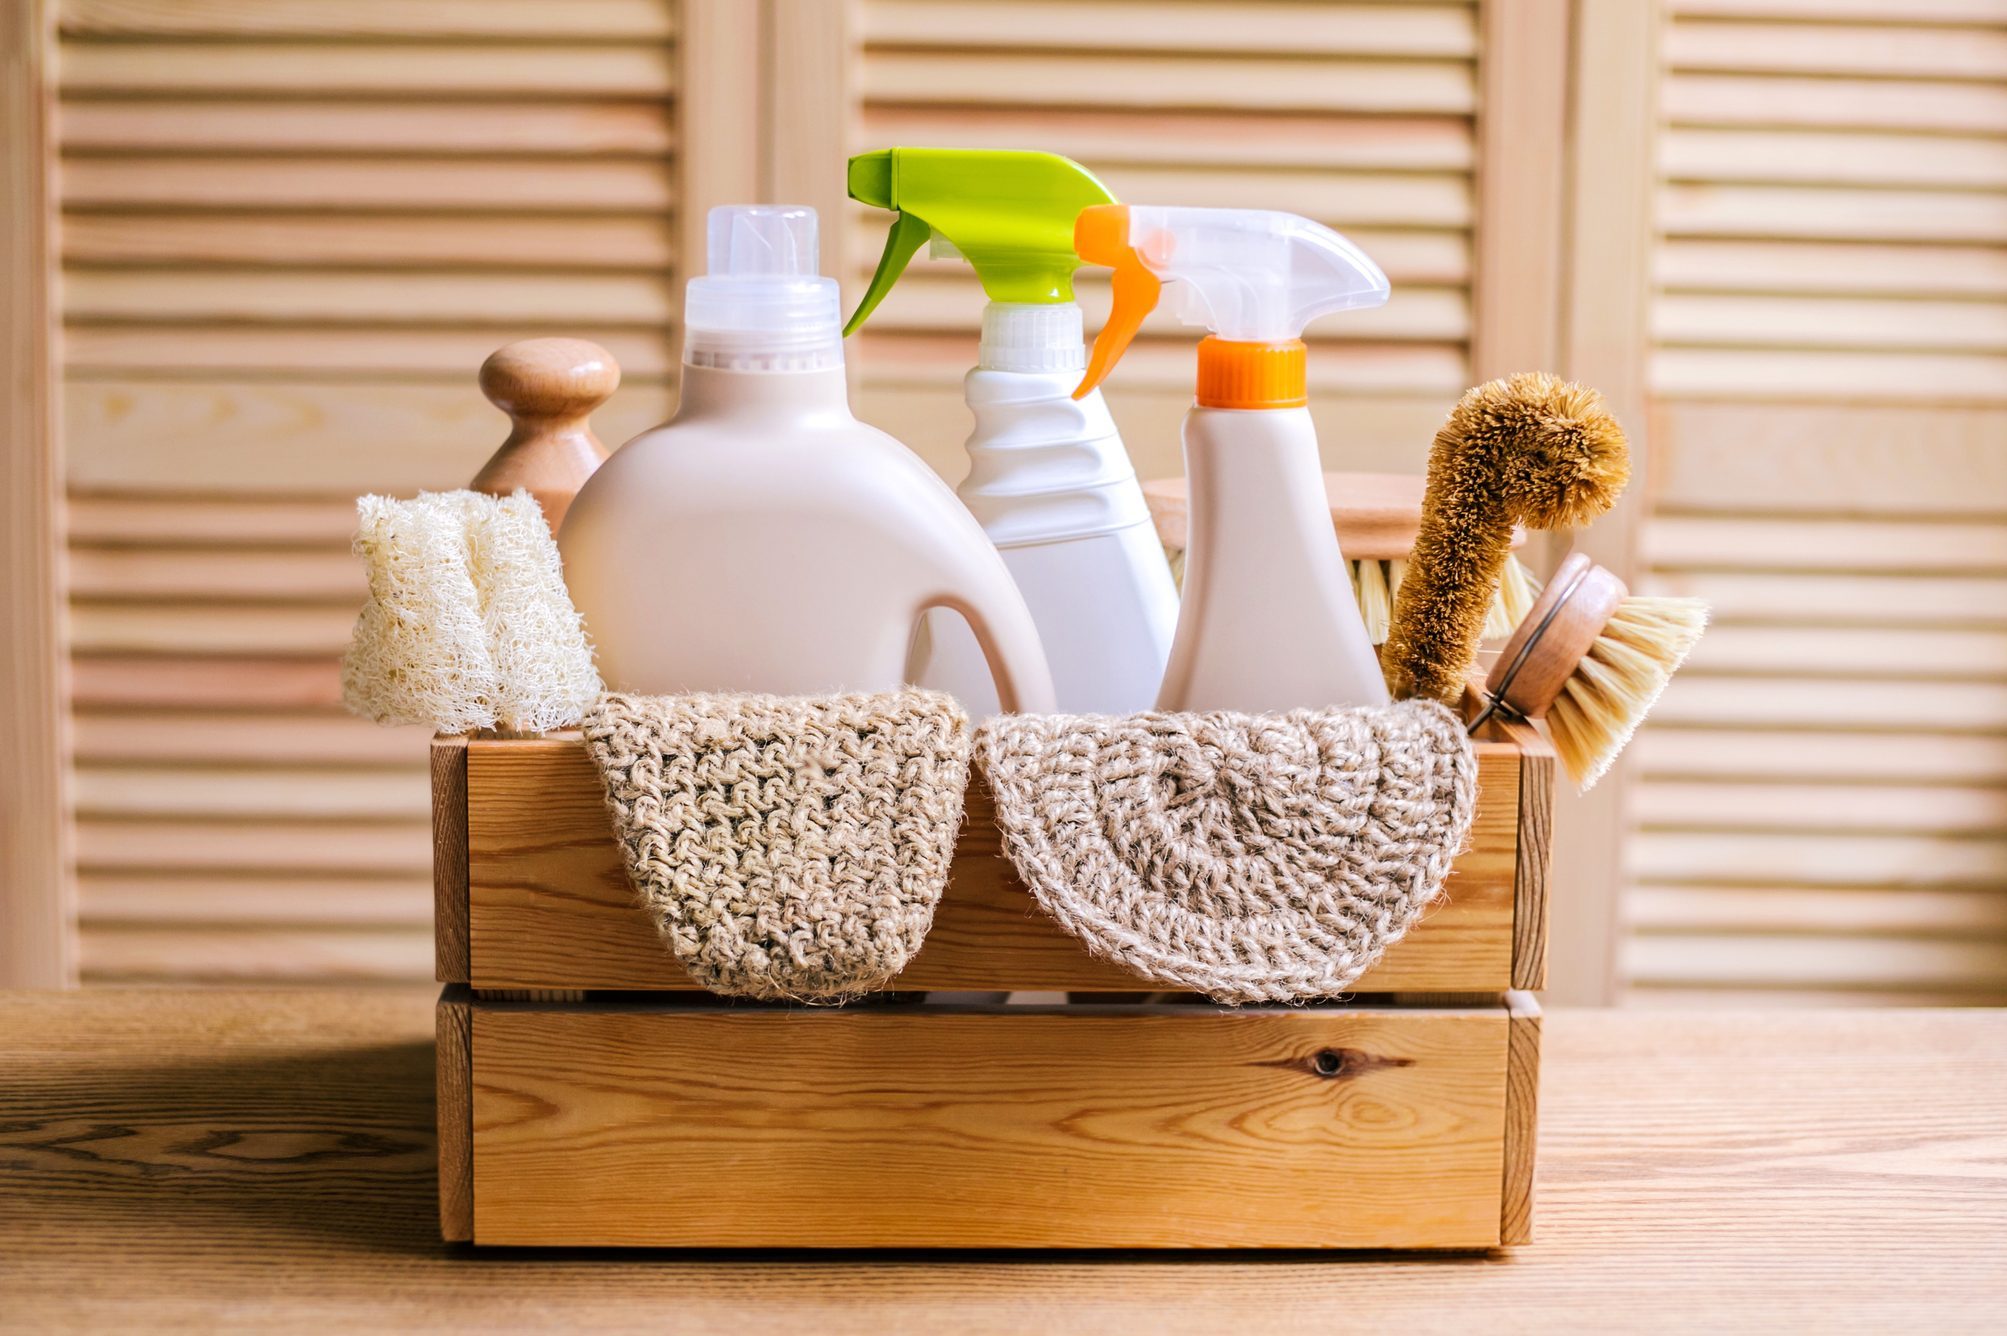 Are Antibacterial Household Products A Health Hazard?